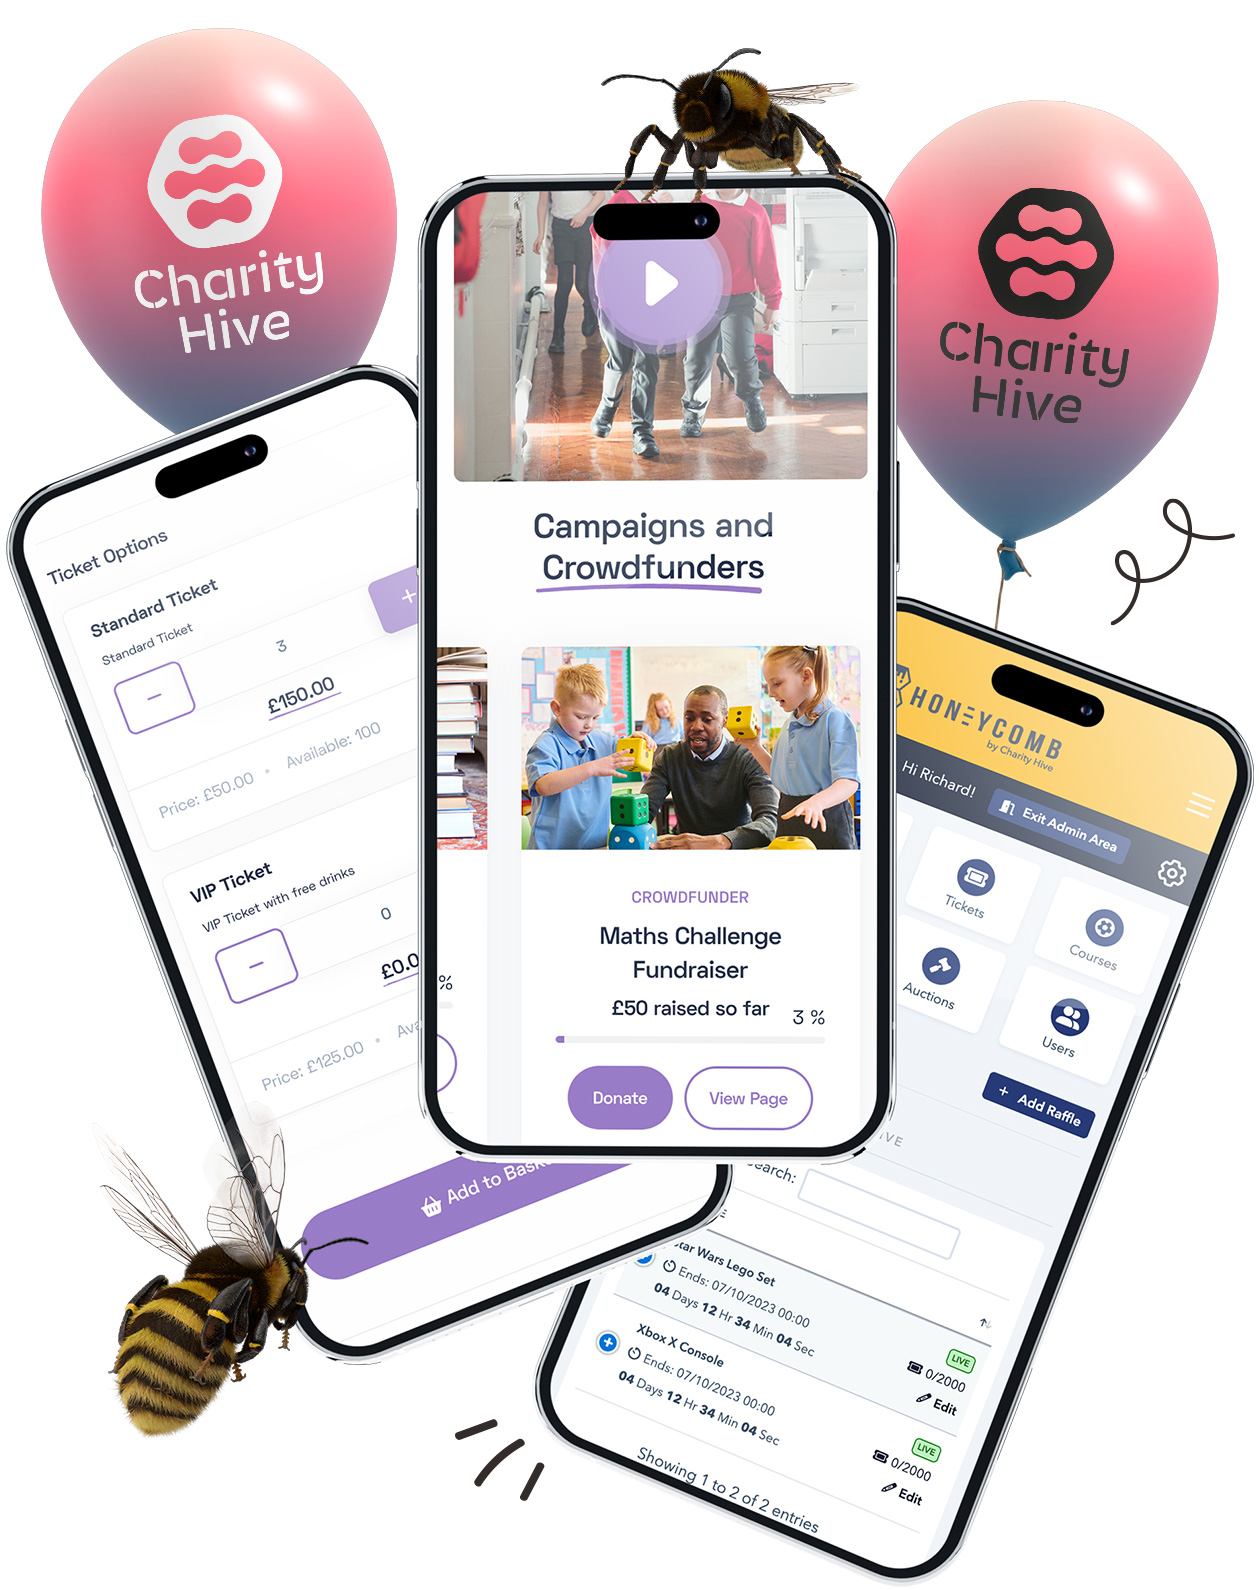 Charity Hive is the only fundraising platform you need